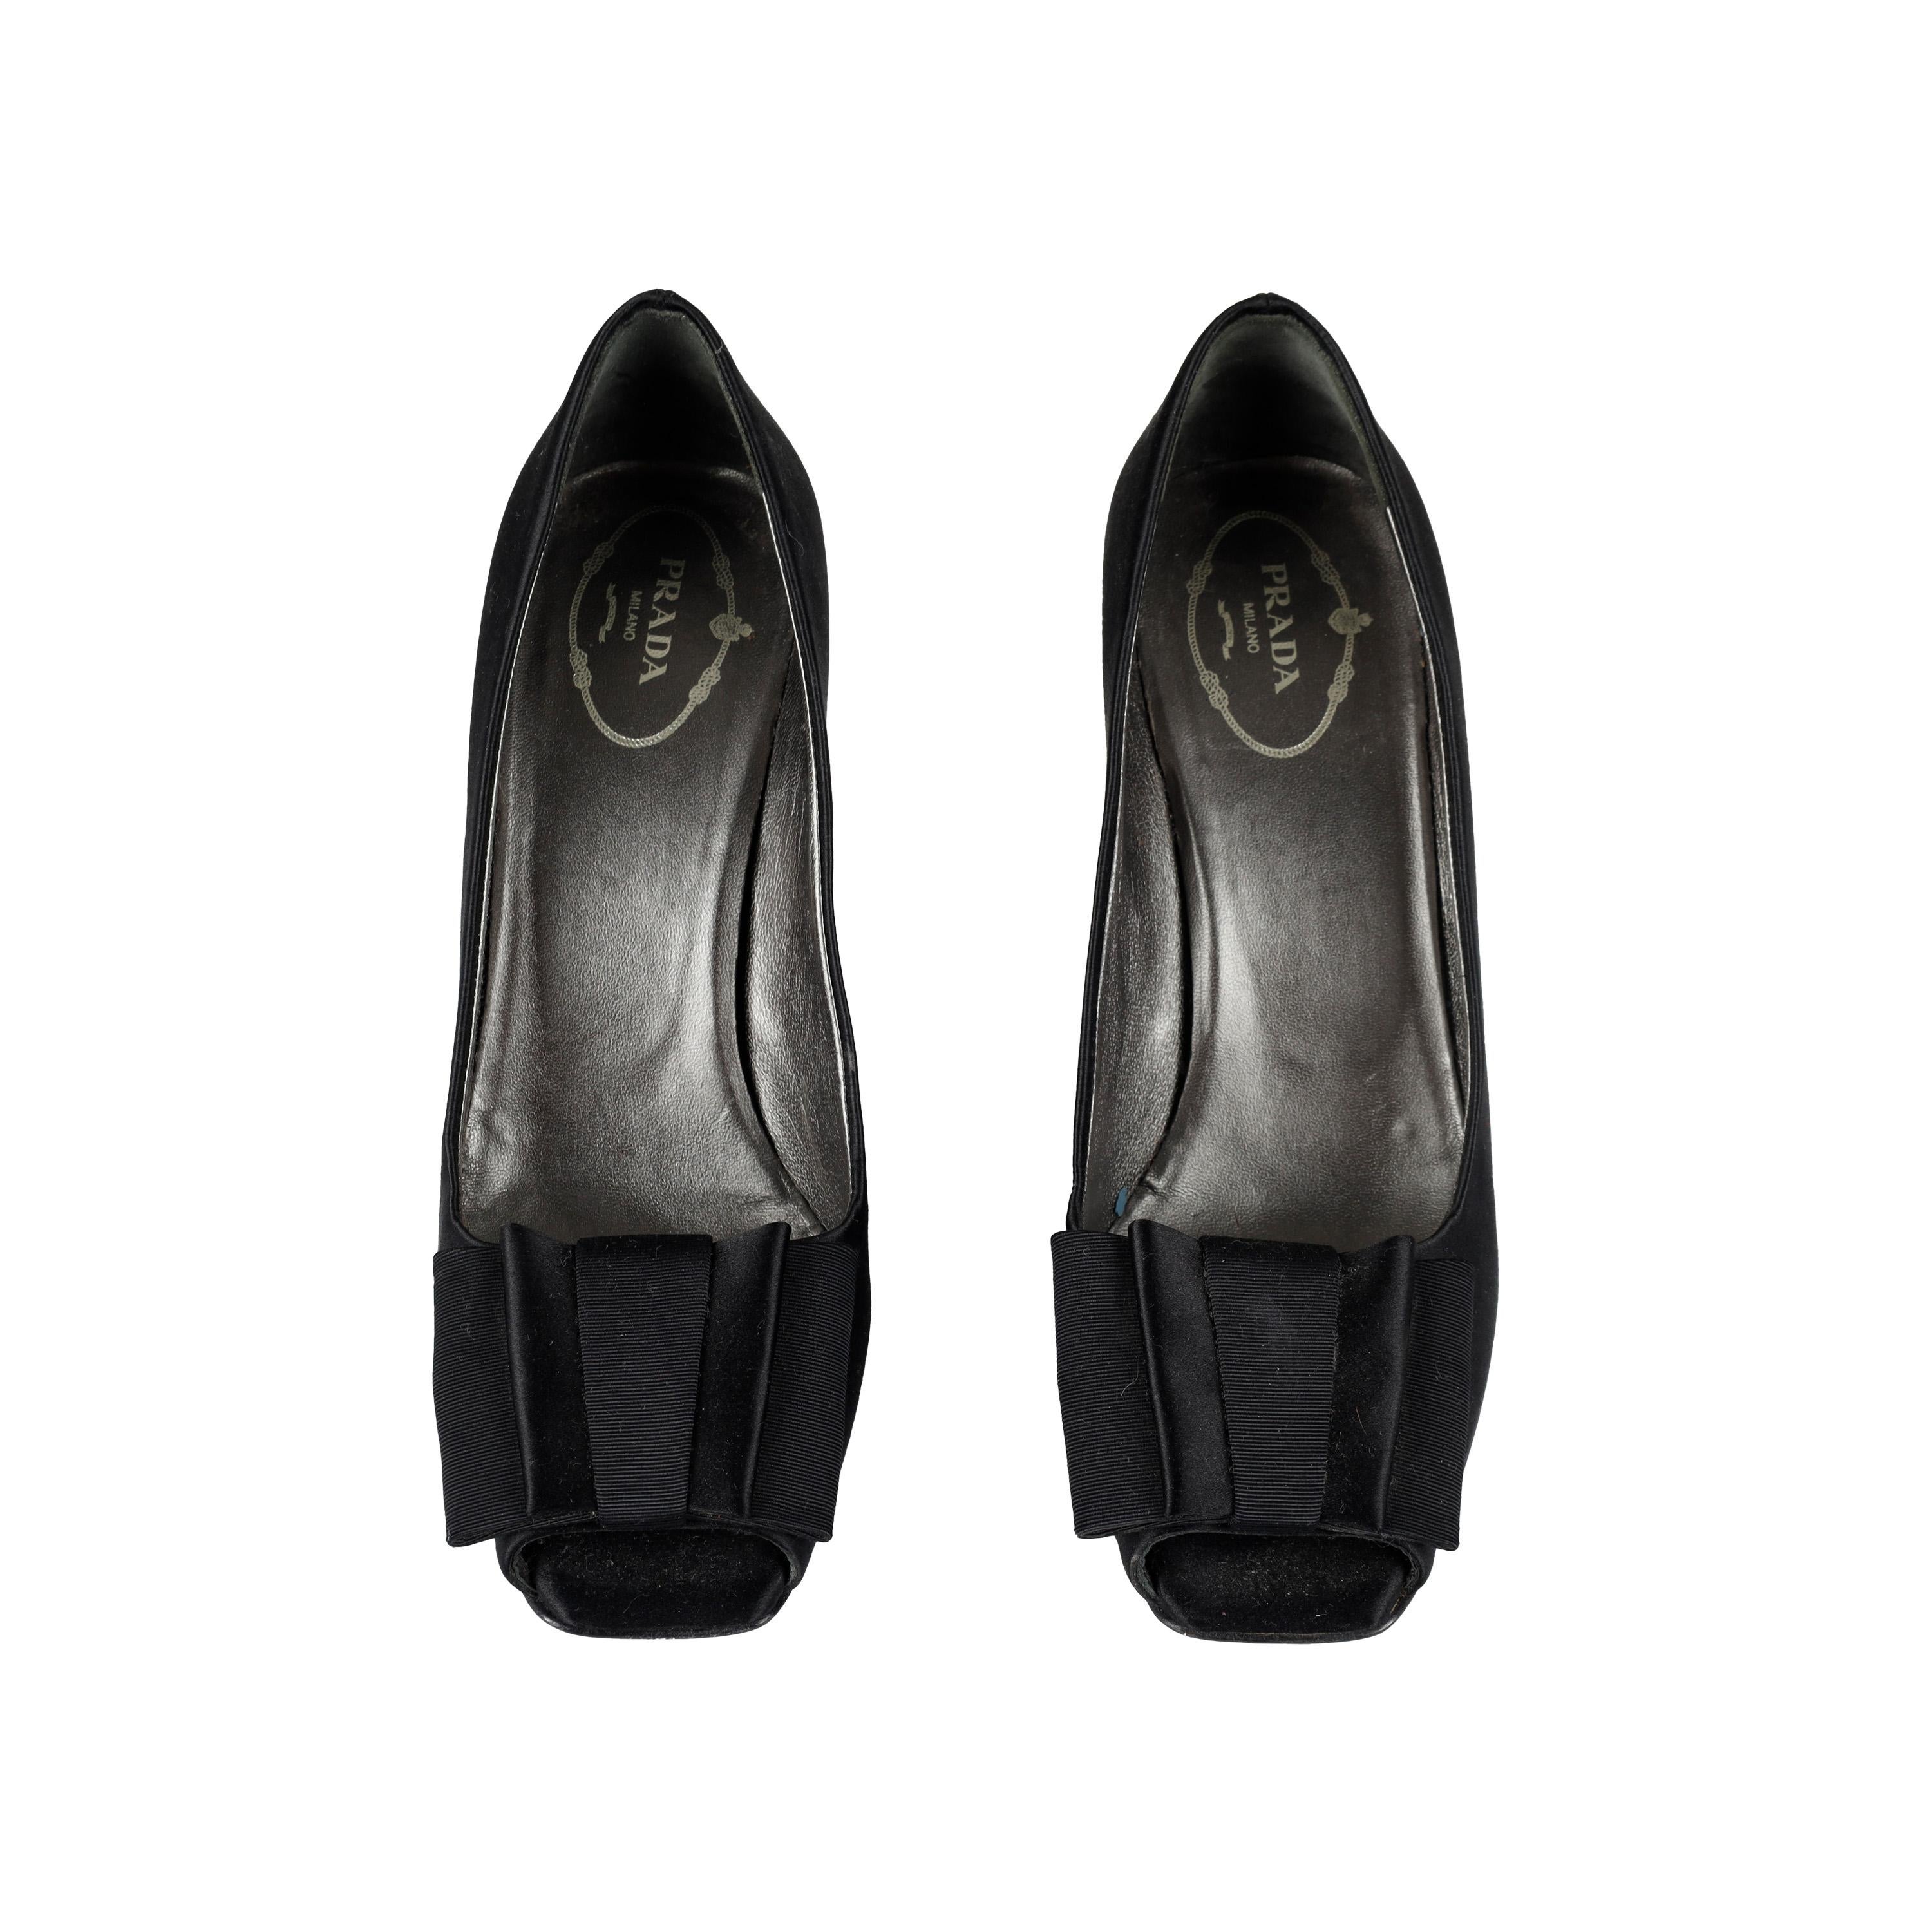 Elevate your look with Prada's Open Toe Pumps. Crafted in luxurious satin, this sleek design features a thin heel and an open-toe profile with a flat bow at the upper. The perfect addition to any wardrobe.

Remarks: There are some signs of wear.